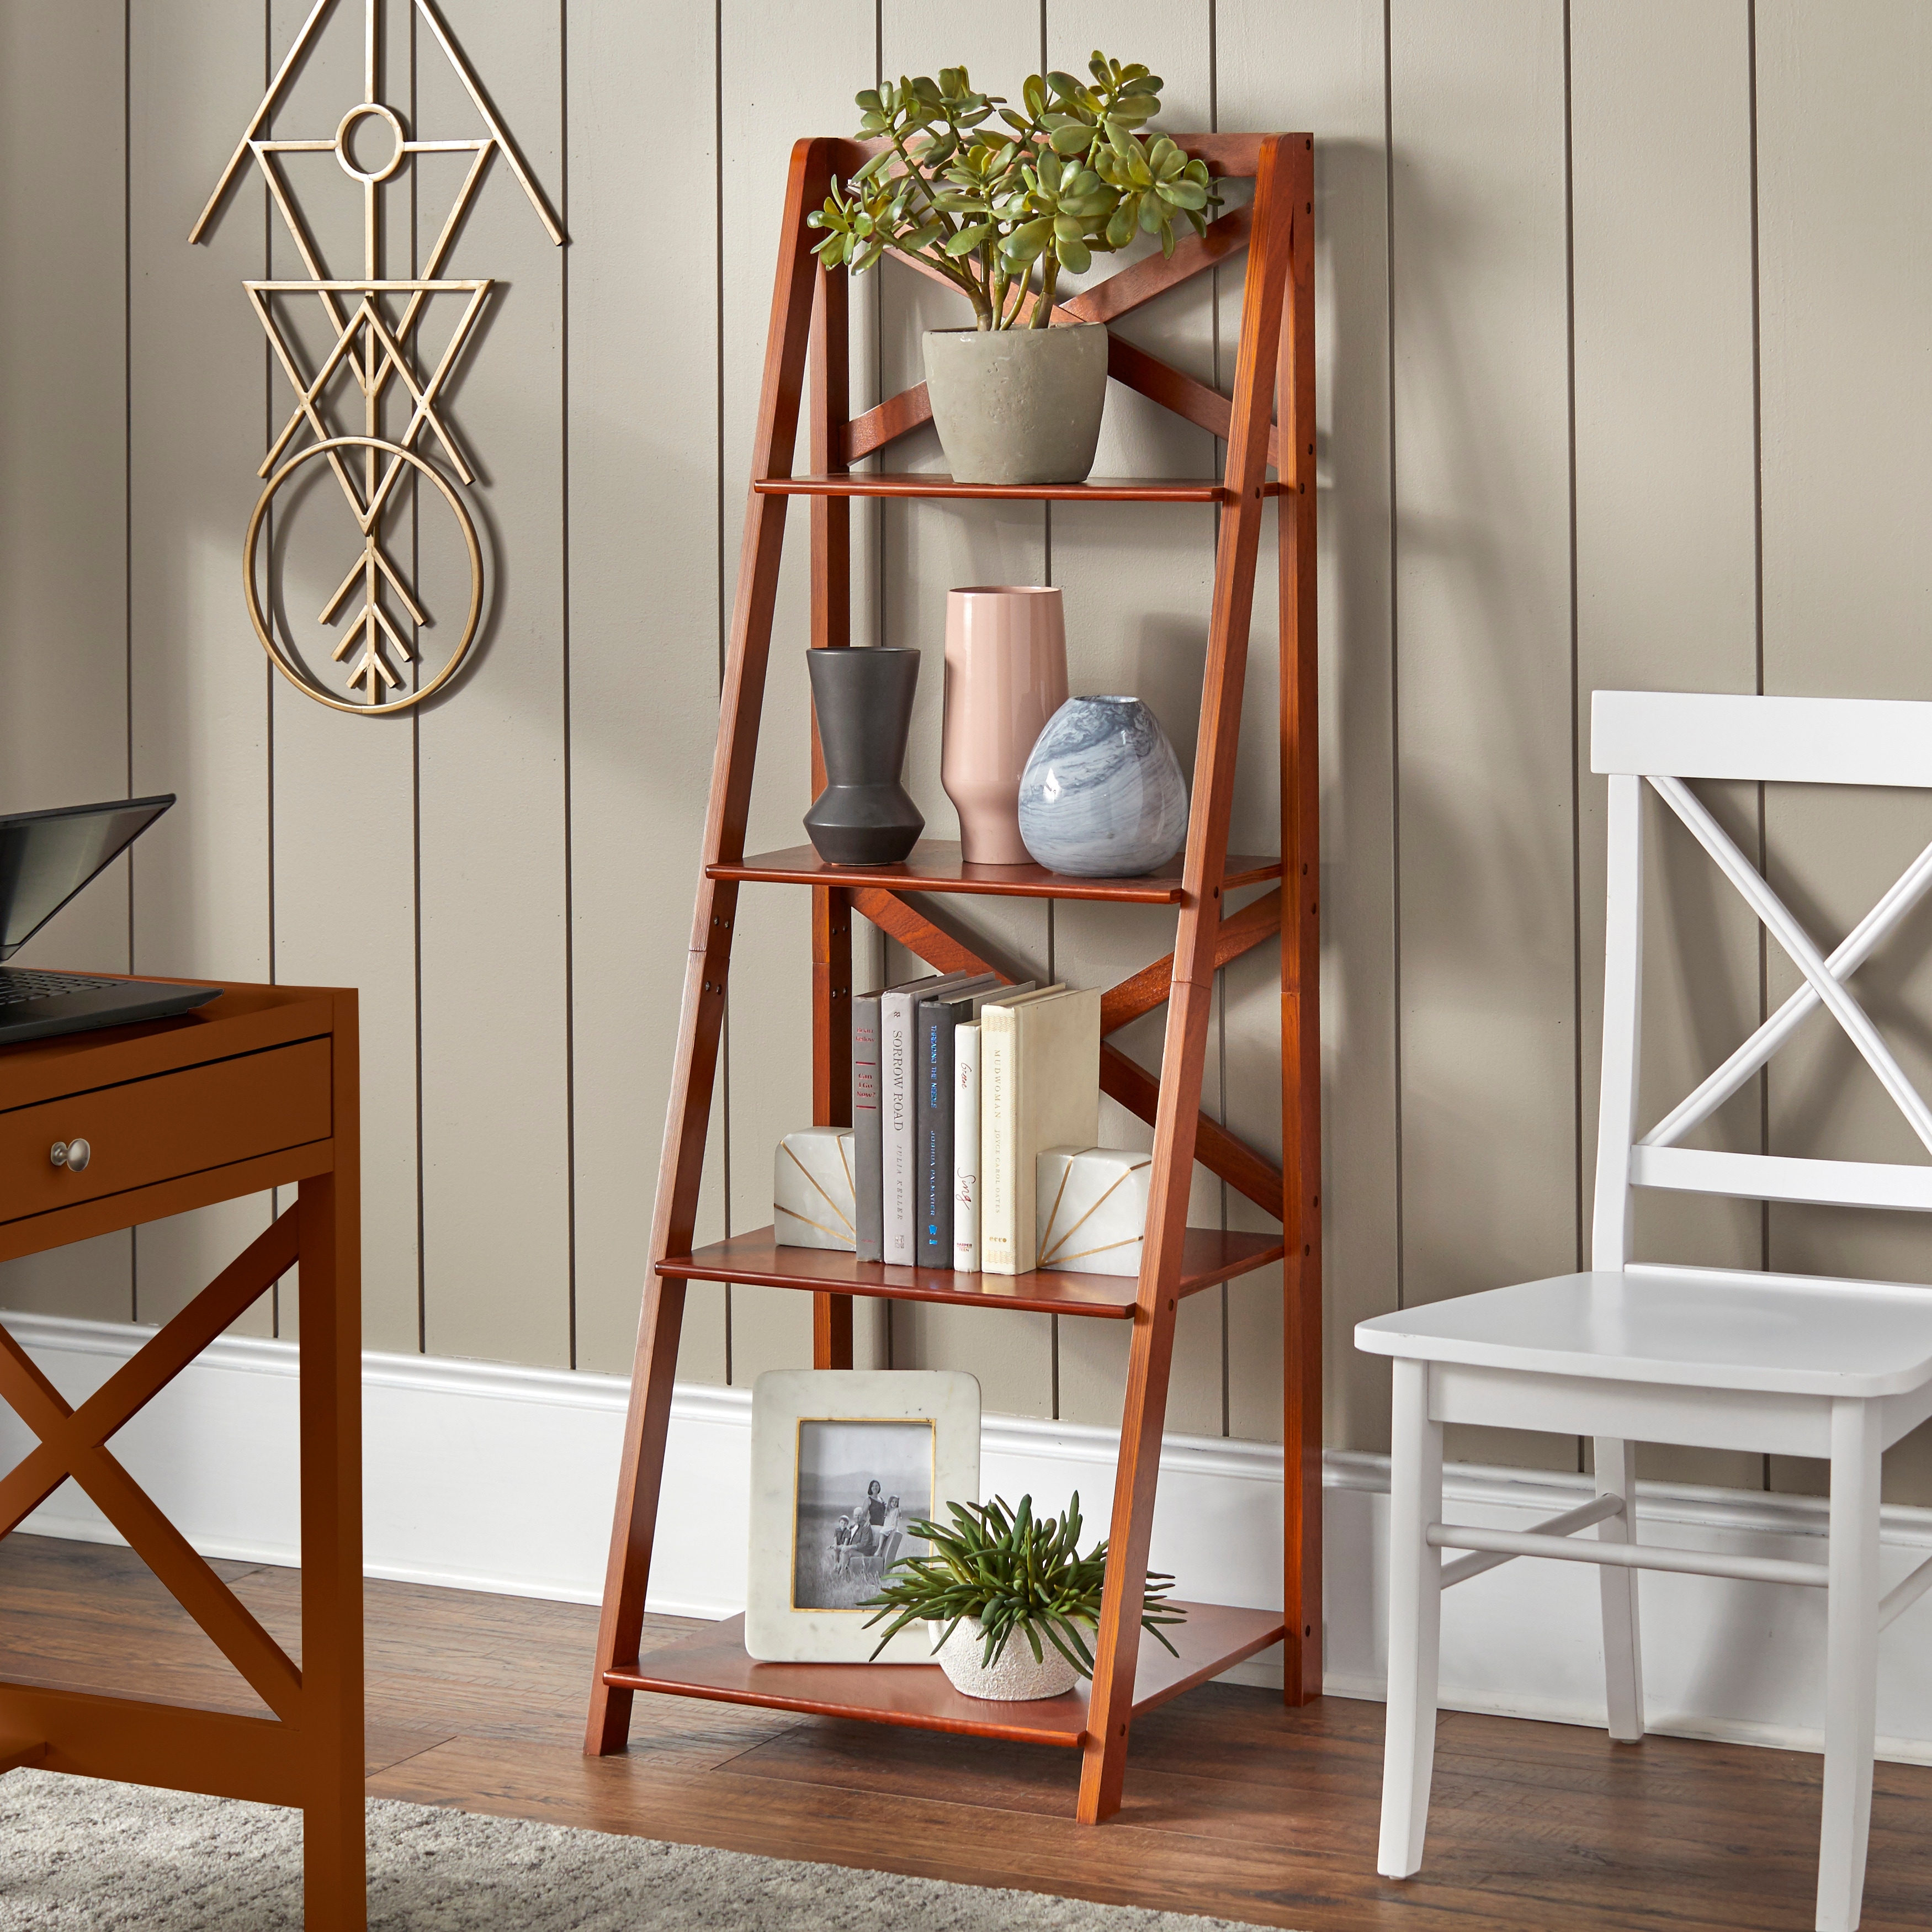 4 Tier Farmhouse Ladder Tall Tiered Wood Outdoor Plant Stand Display Shelf Rack Natural